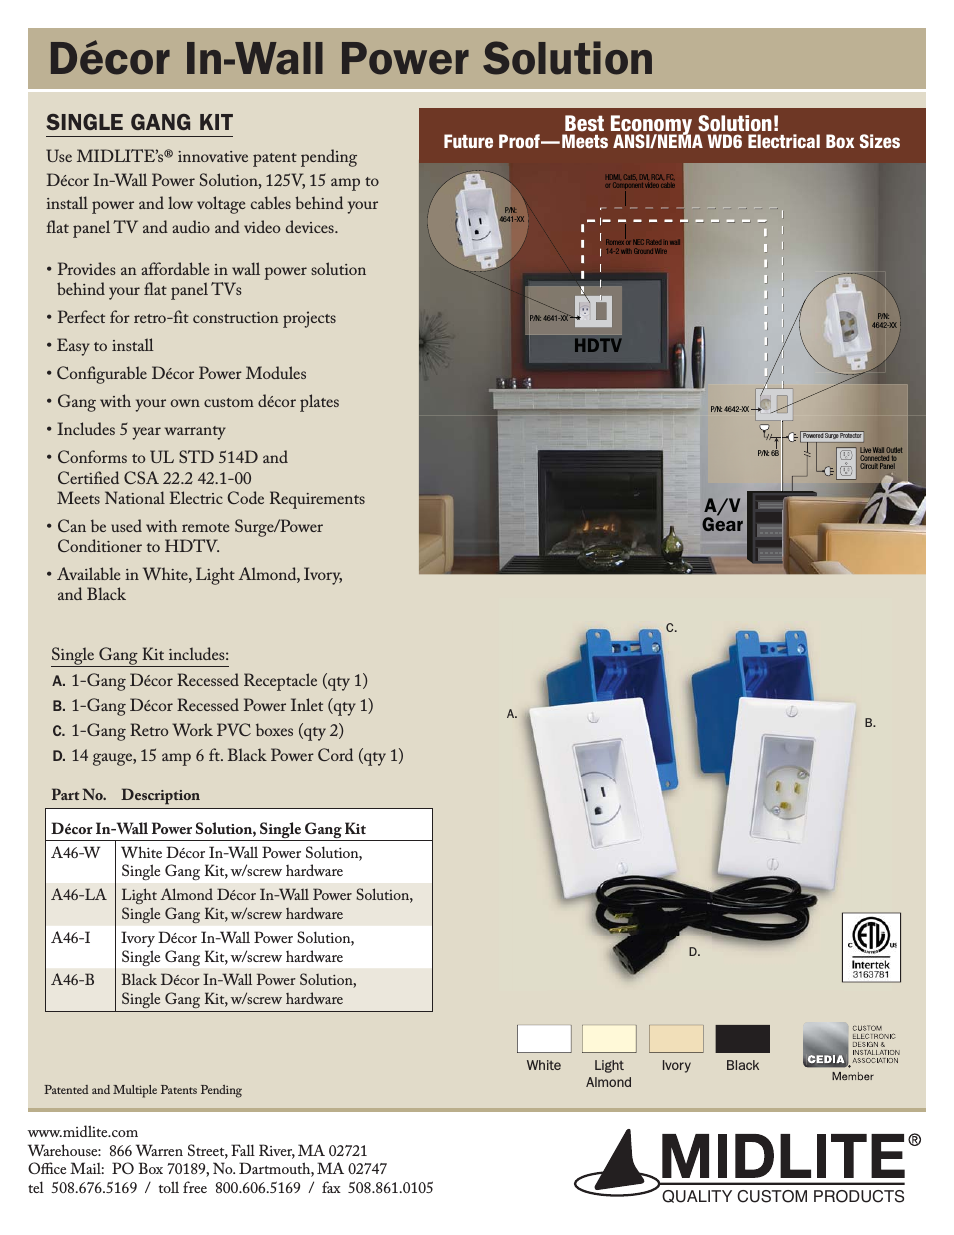 SINGLE GANG DÉCOR IN-WALL POWER SOLUTION KIT WITH 6 FT CORD